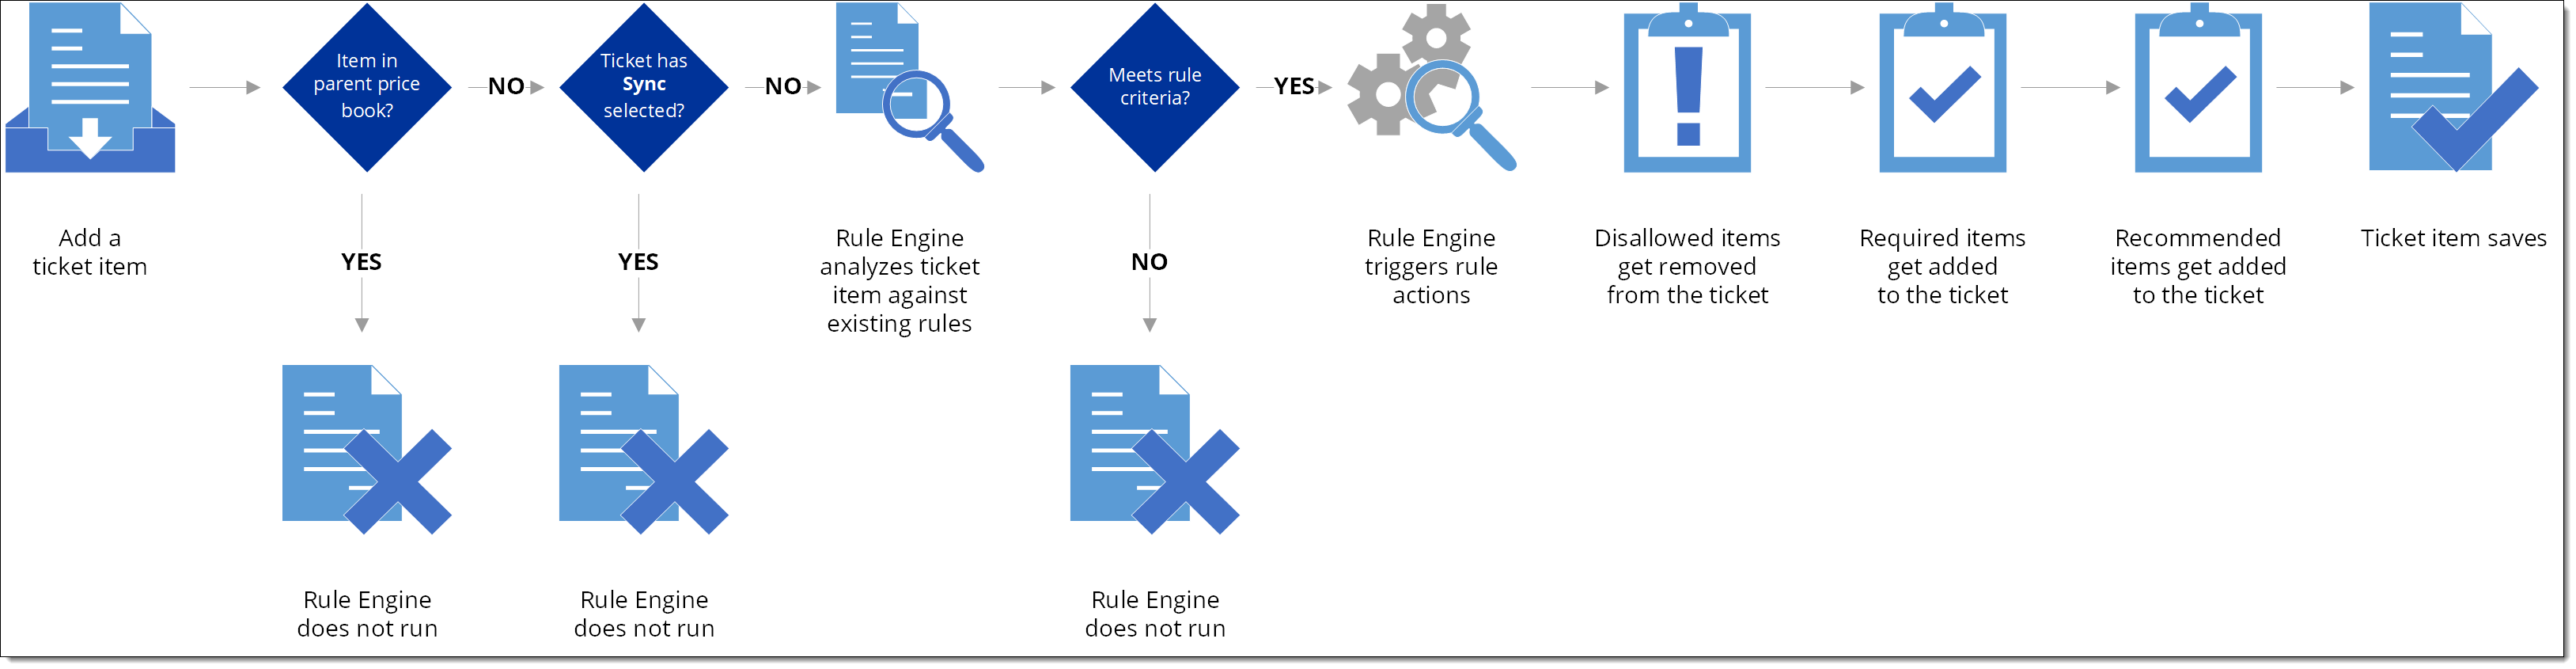 Graphic showing the rule engine process when adding a ticket item in FieldFX Back Office